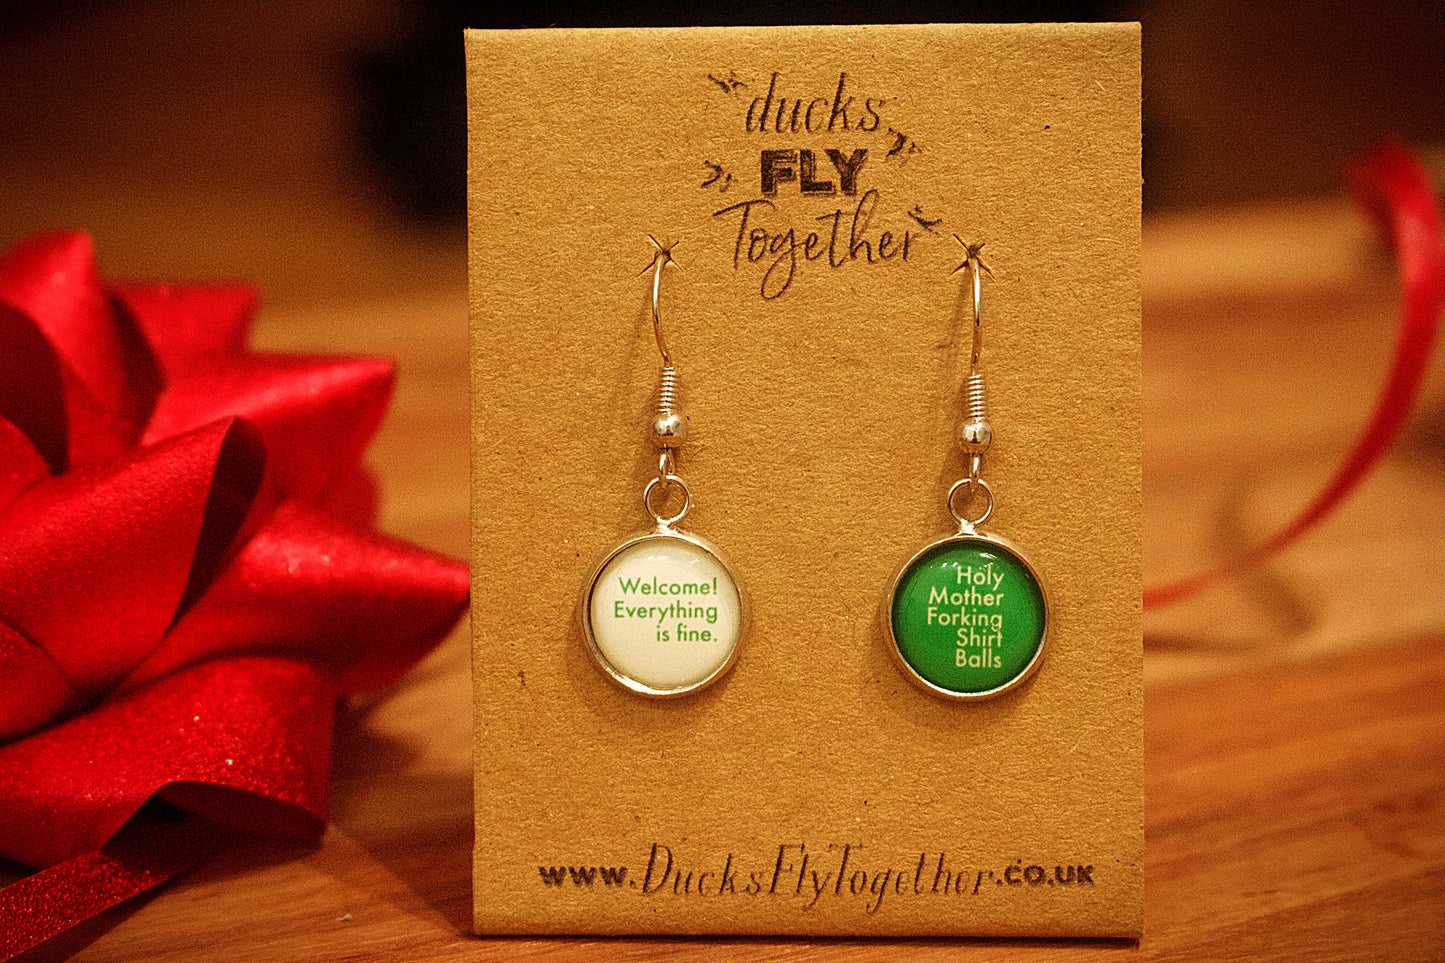 Novelty earrings inspired by The Good Place. Holy Mother Forking Shirt Balls. Welcome Everything is Fine. Mothers Day Gift. Gift for Mum.